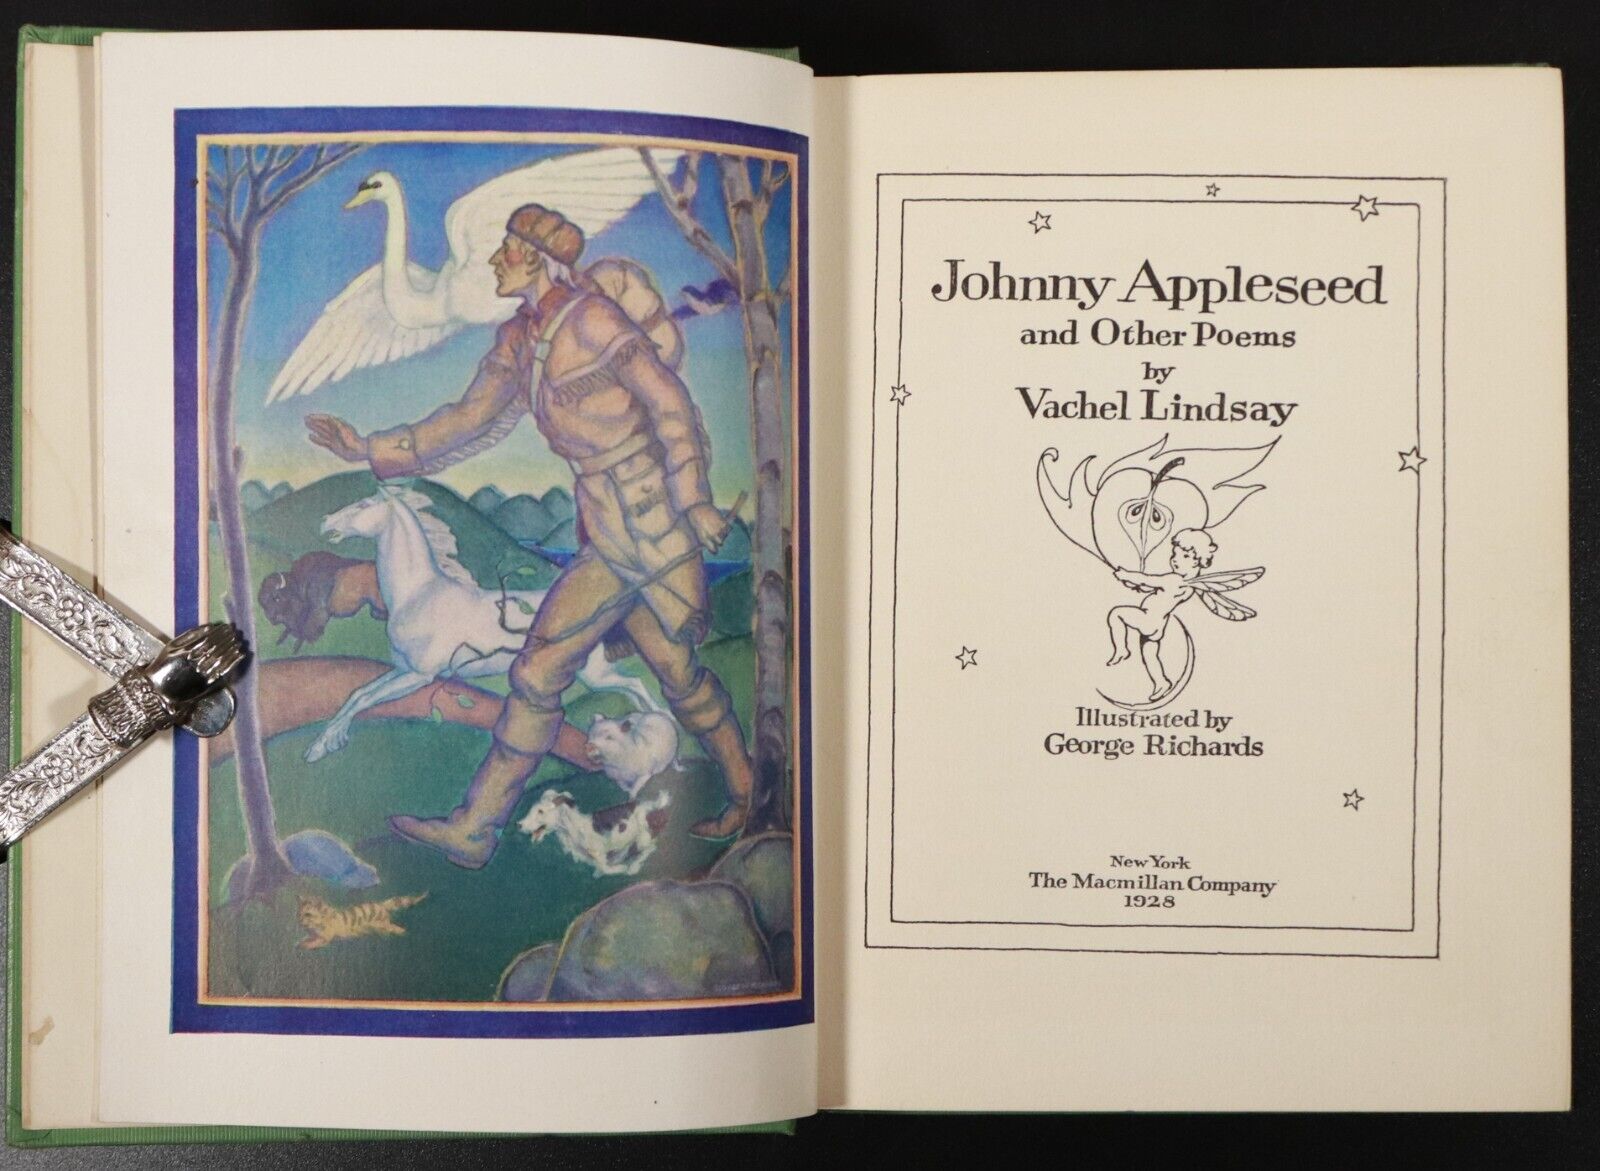 1928 Johnny Appleseed by Vachel Lindsay Antique American Poetry Book Illustrated - 0